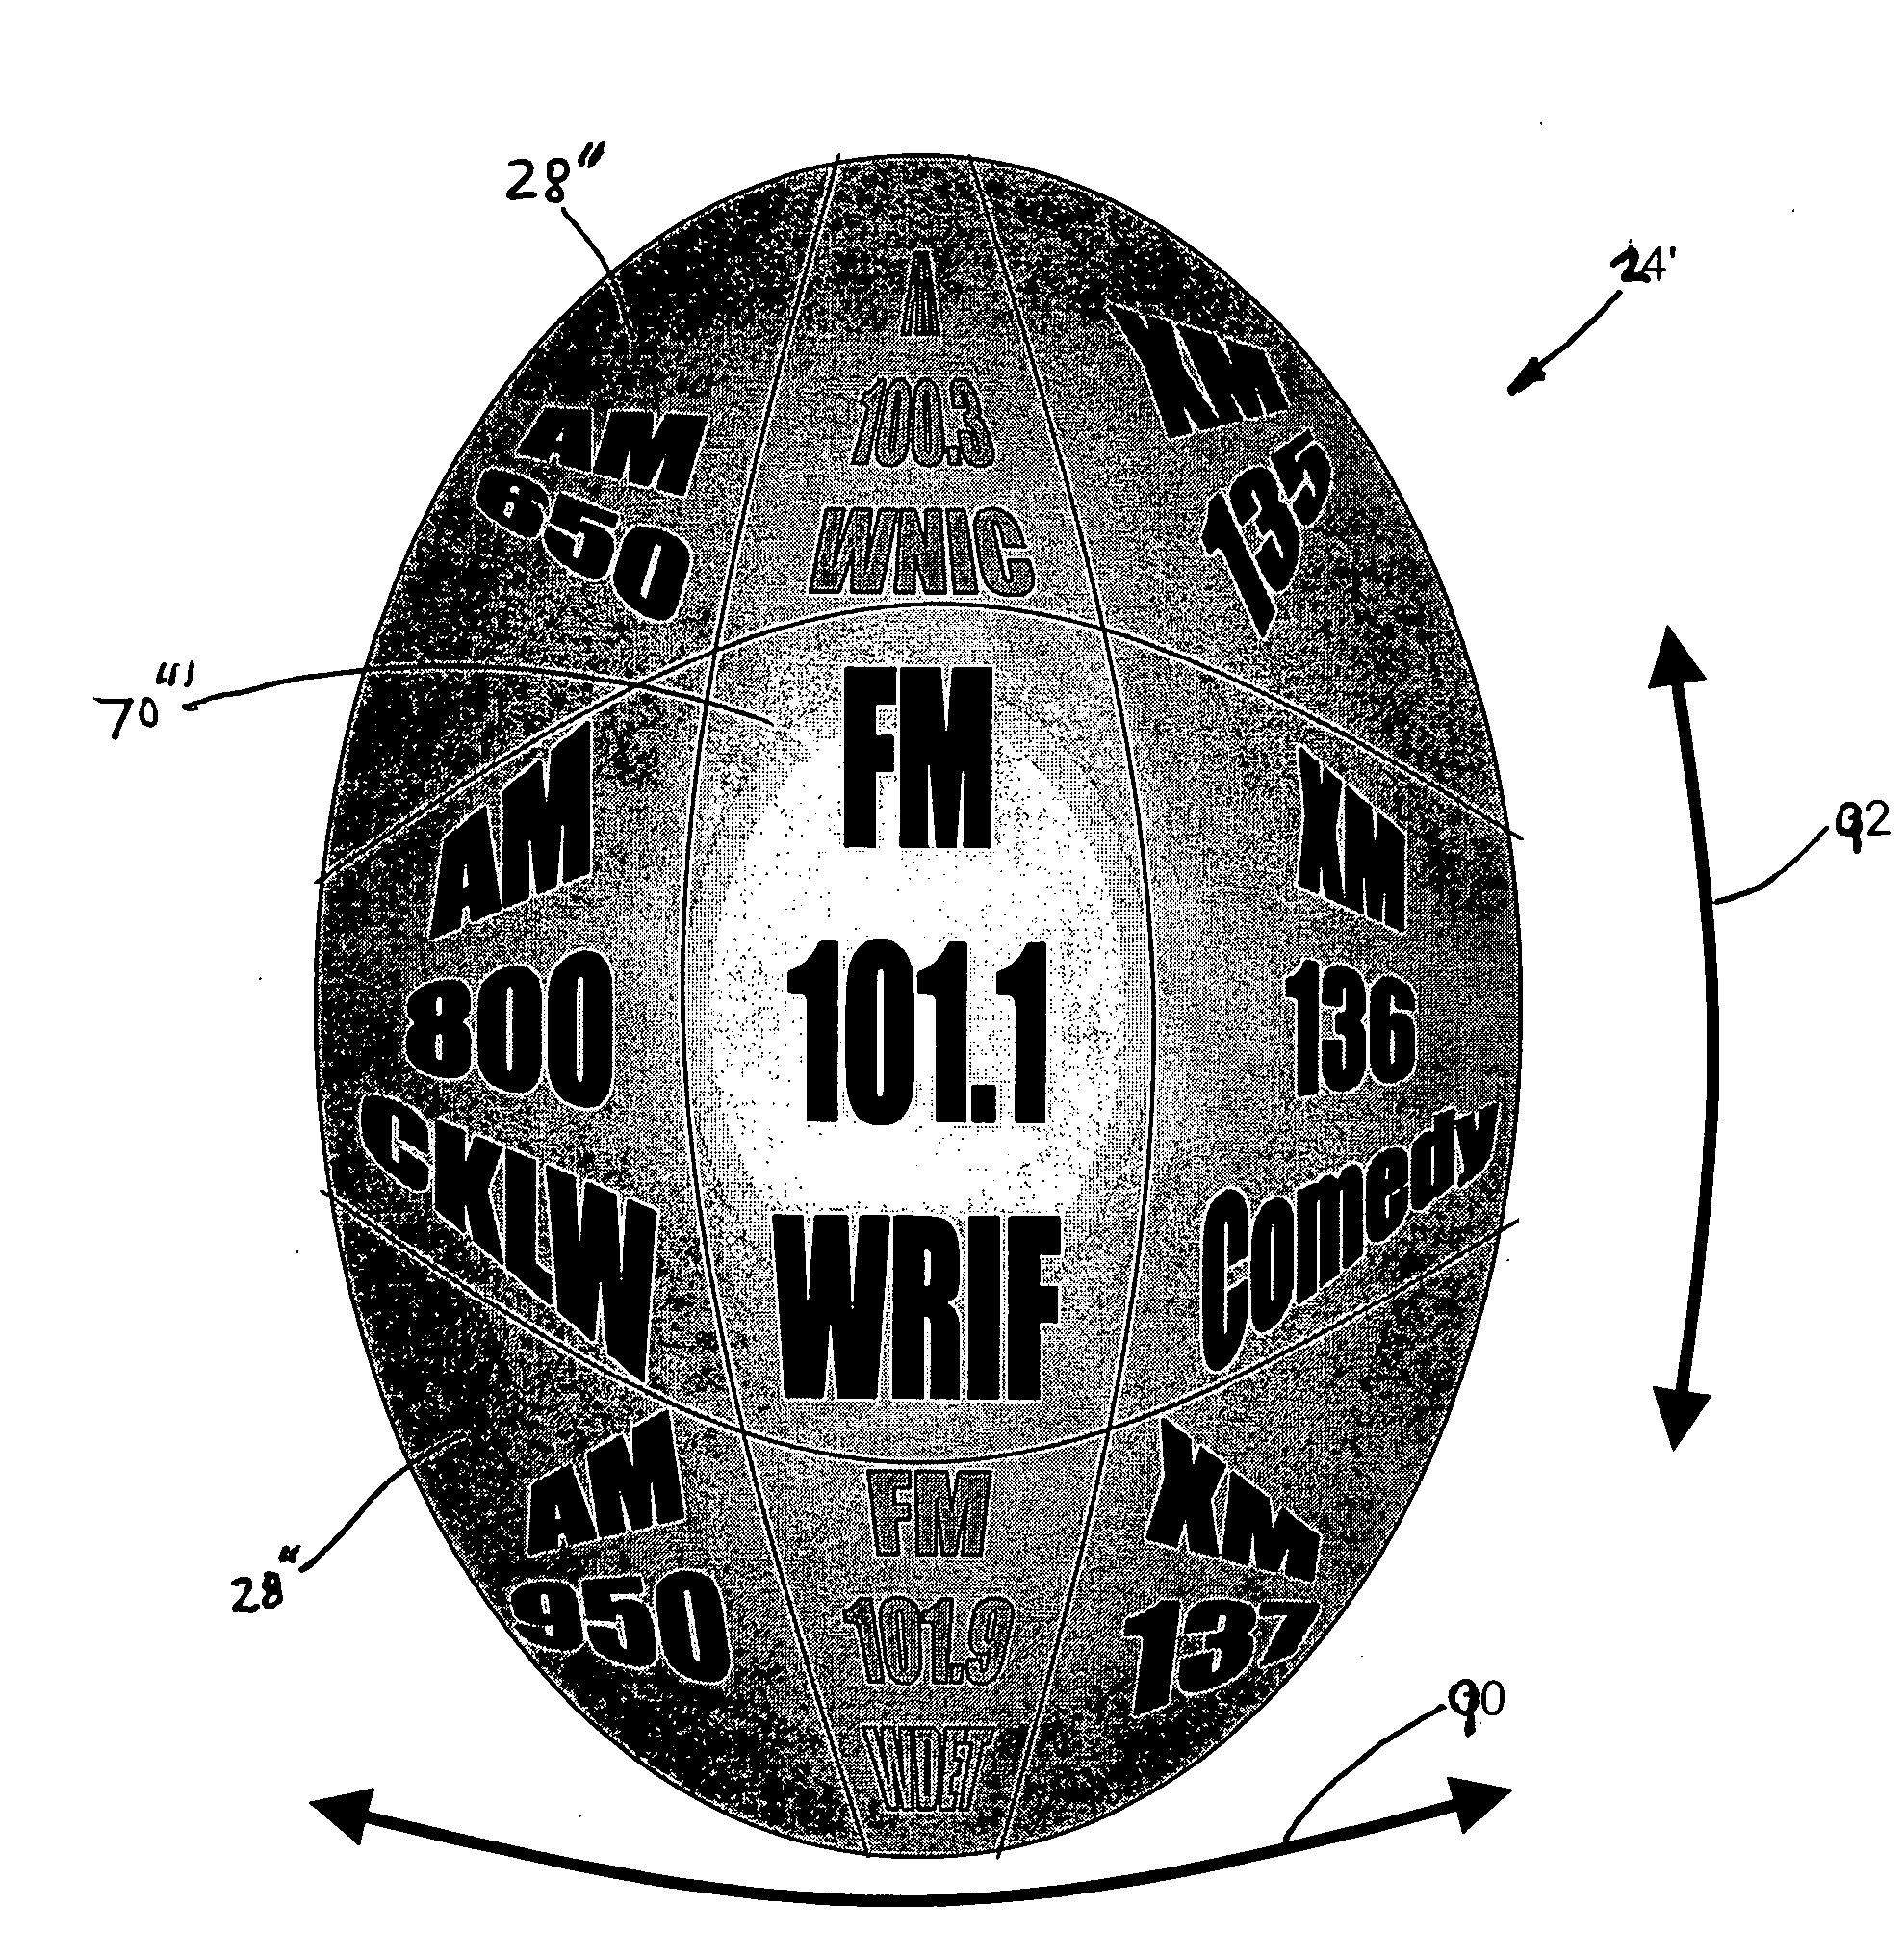 Three-dimensional display and control image